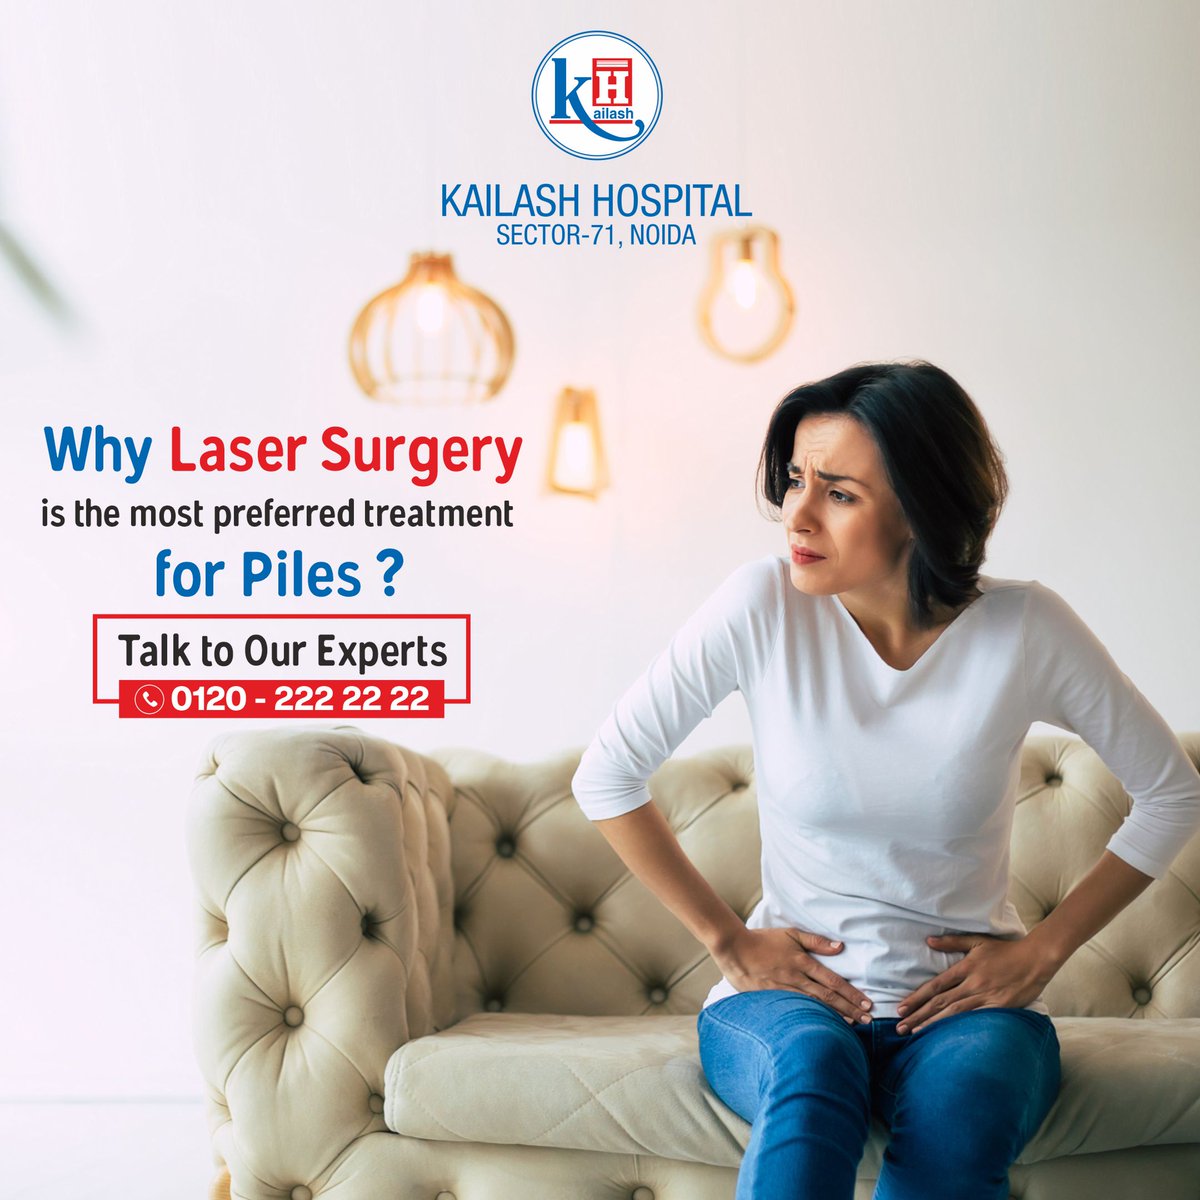 Tired of dealing with the discomfort and pain of Piles?
Laser surgery, the most preferred treatment for piles available at Kailash Hospital, Sector 71, Noida.
To consult our experts, call : 0120 2222222

#piles #pilestreatment #PilesSurgery #pilesproblem #lasersurgery